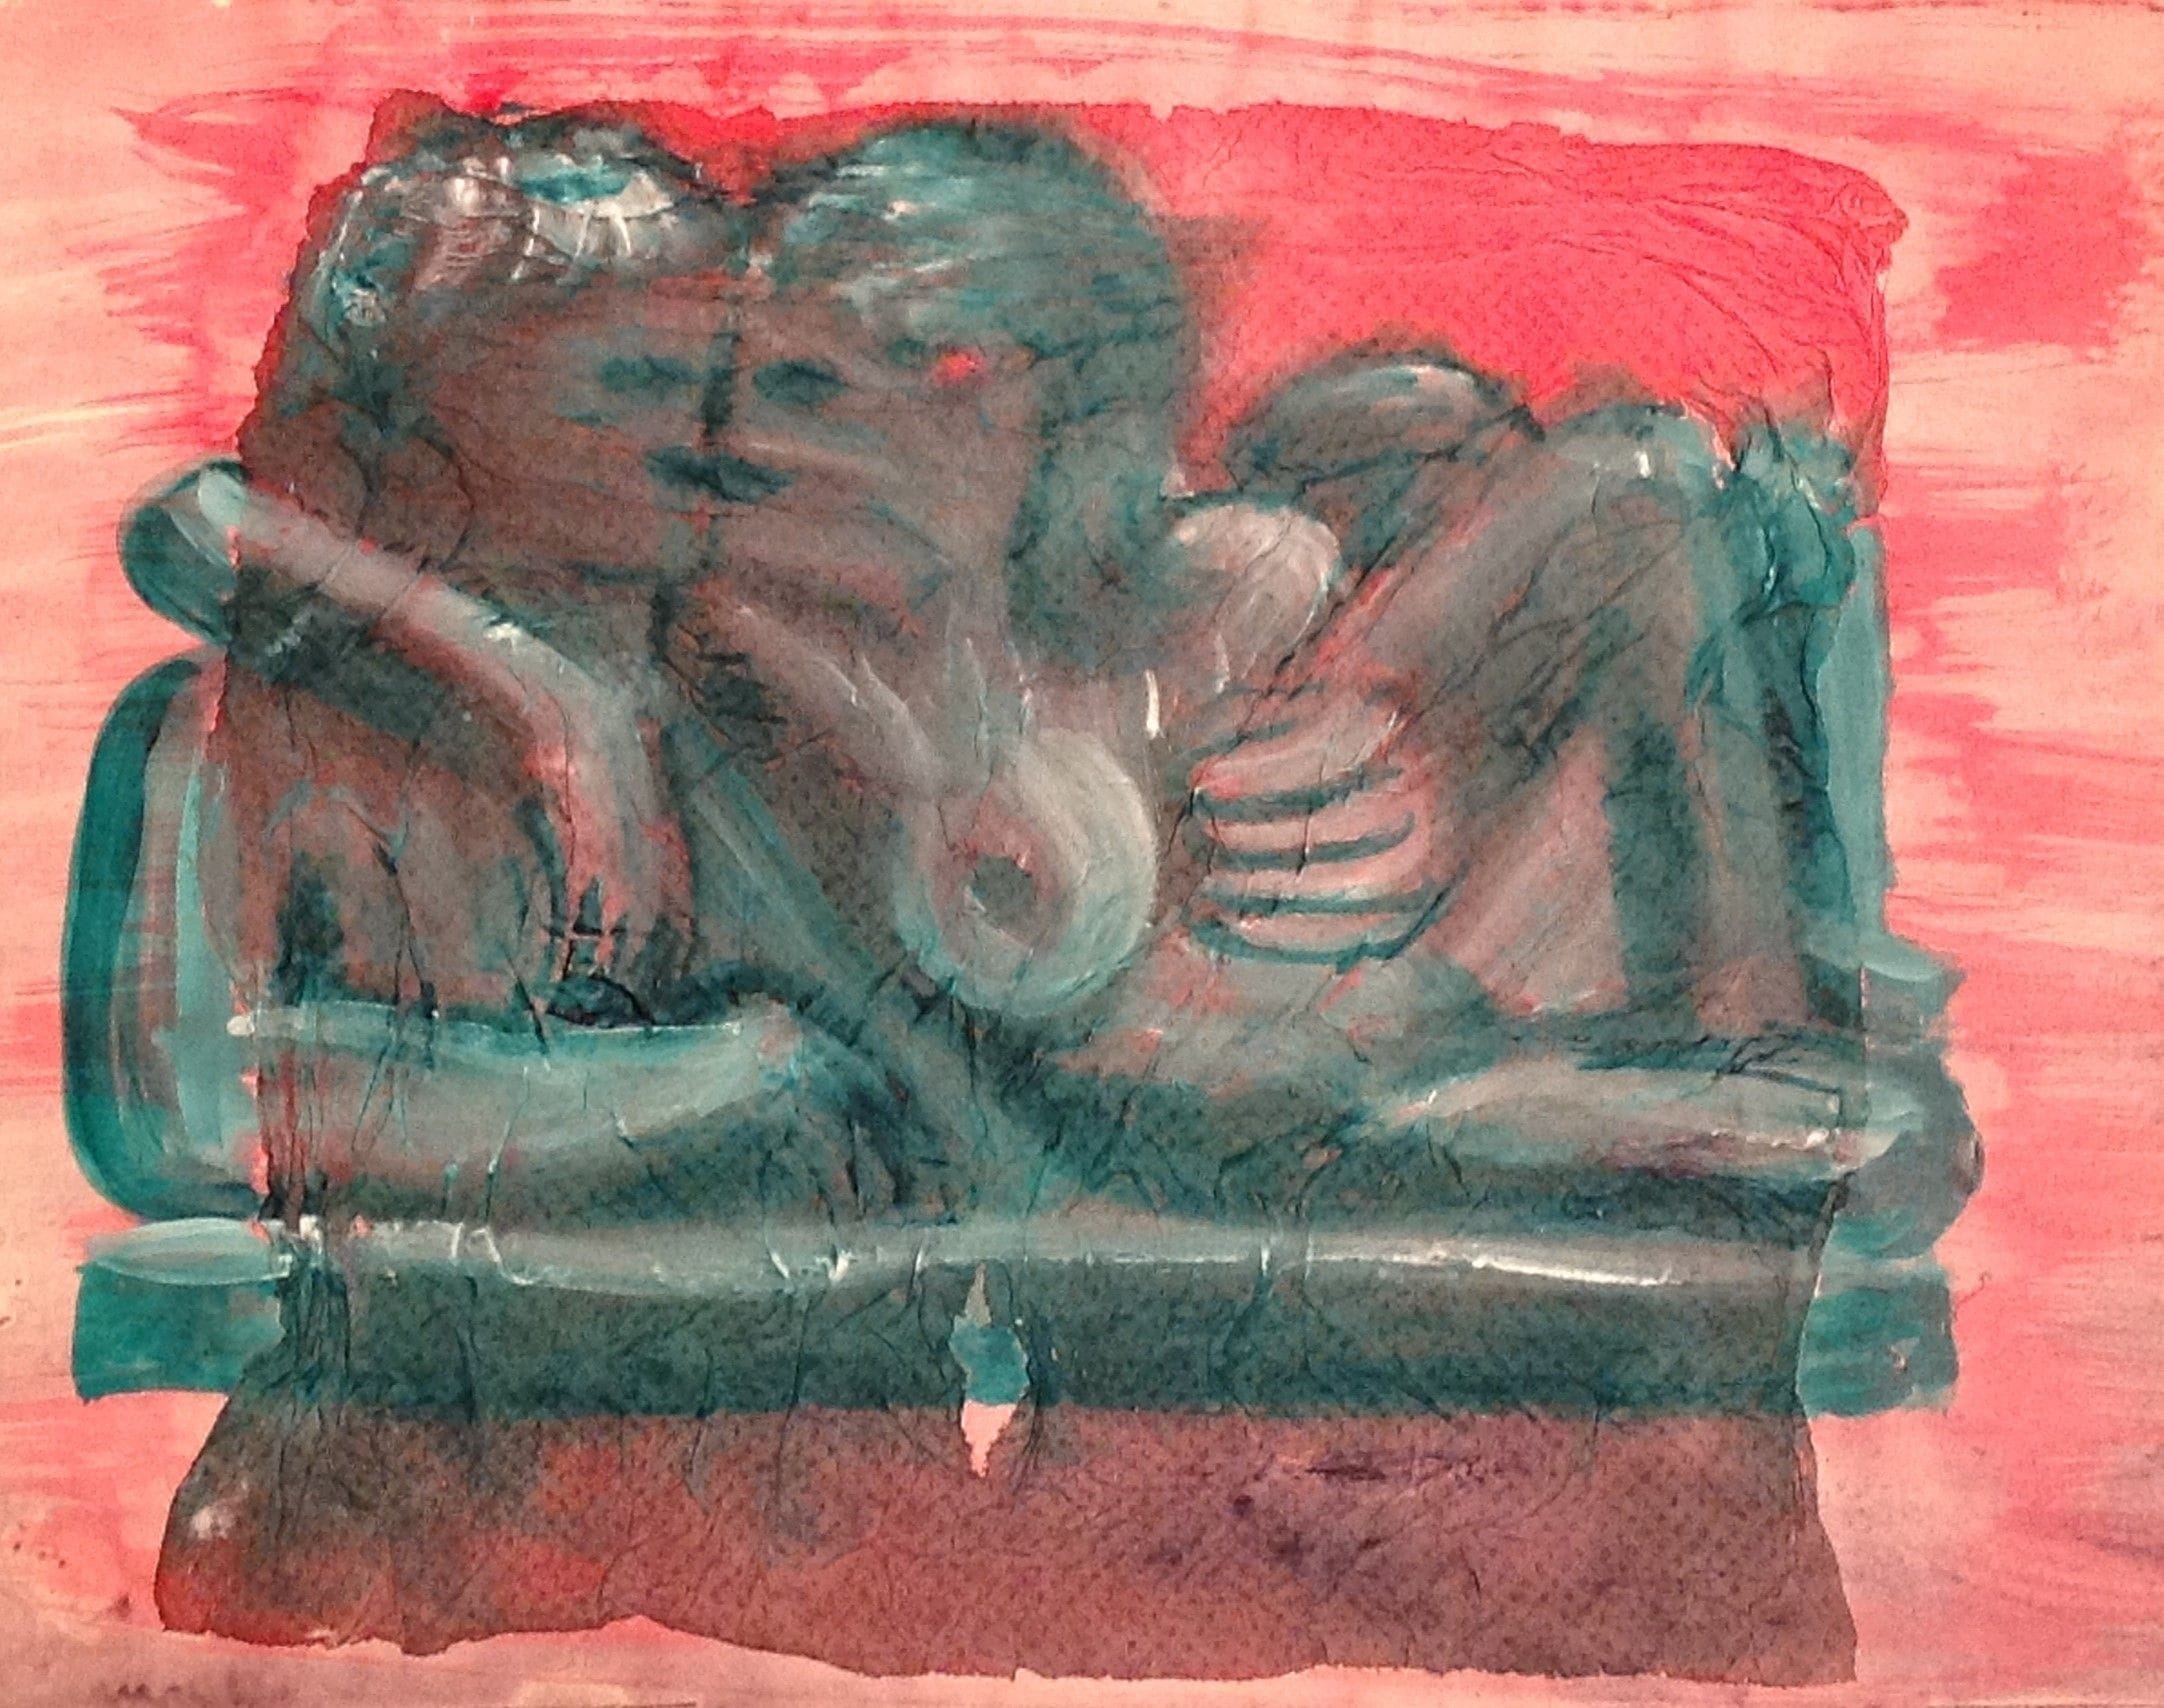 The Kiss, 1991
Watercolor on Paper Towel and Paper
11"W x 8.5"H, Walli White, artist